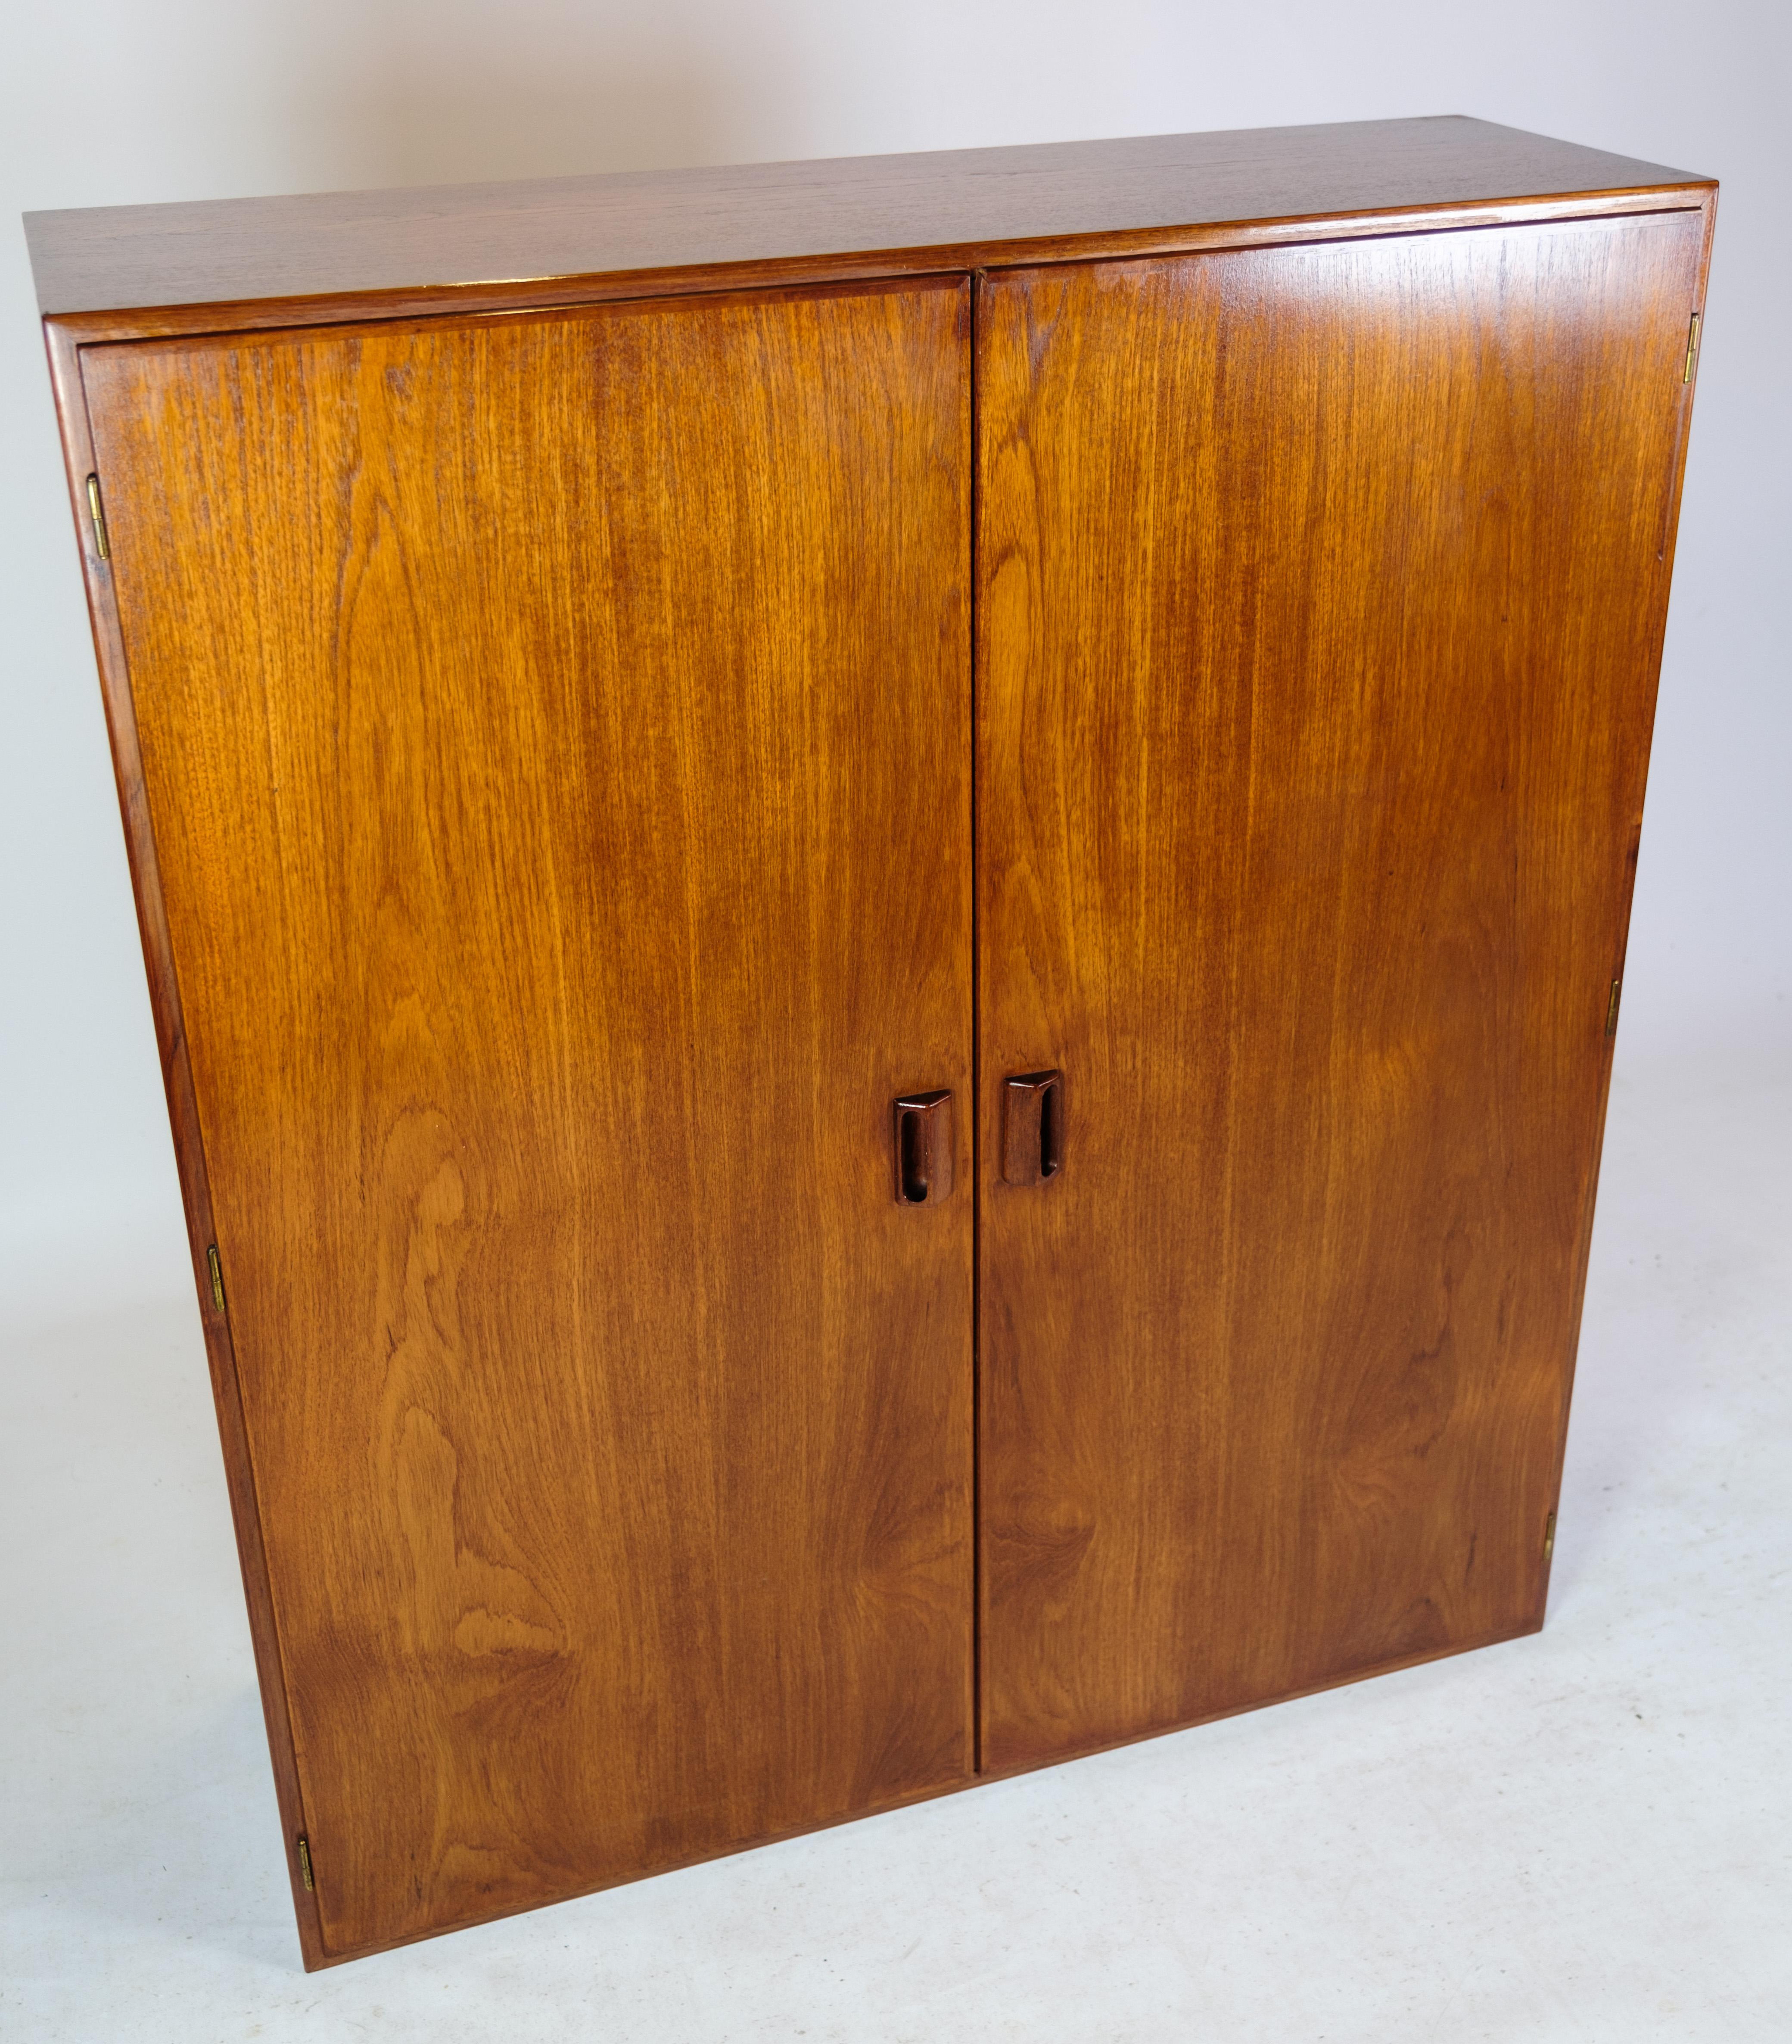 Danish Børge Mogensen Hanging Cabinet In Teak Wood from the 1950s For Sale